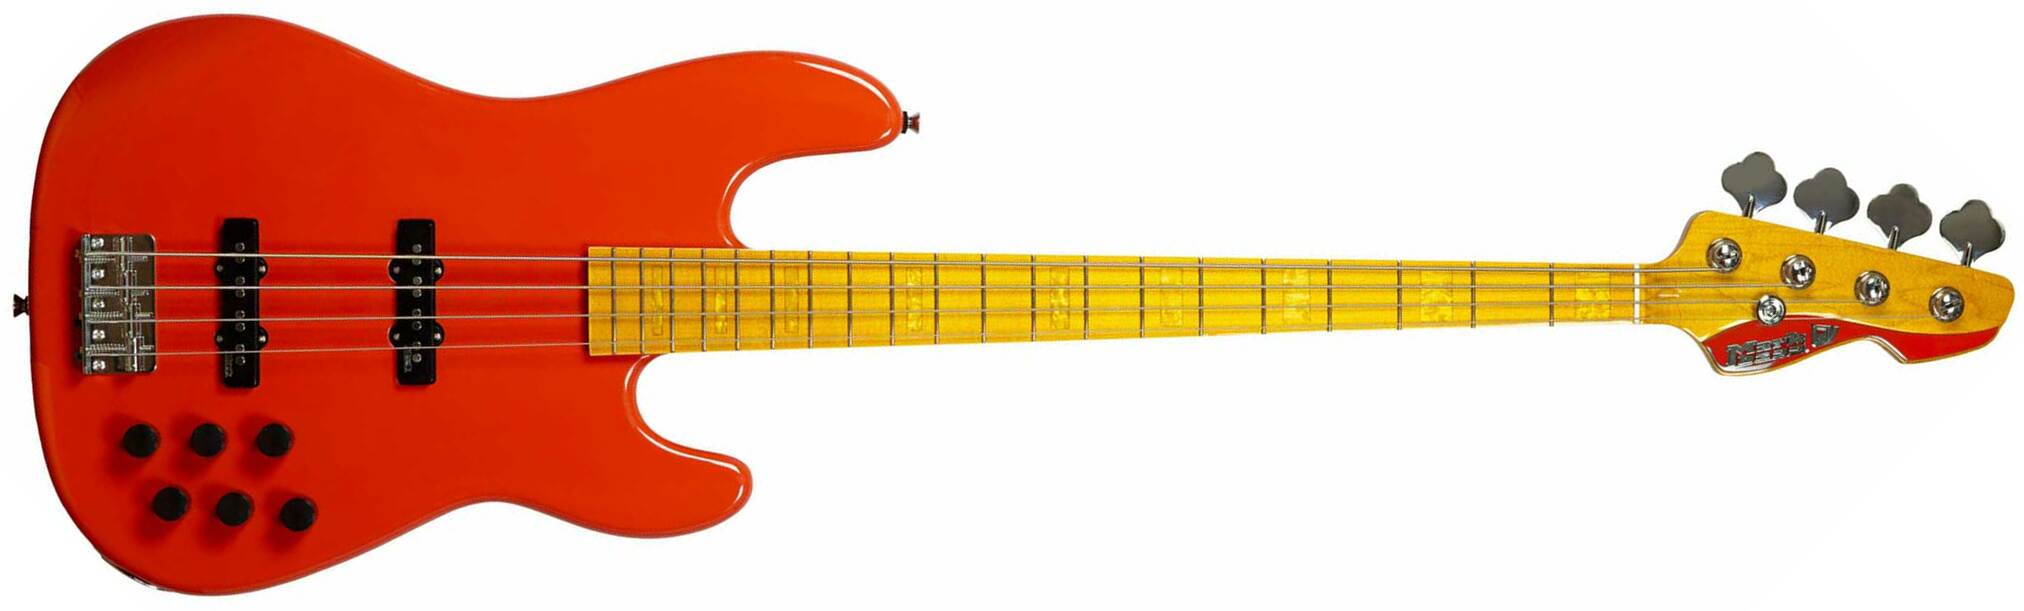 Markbass Mb Gv 4 Gloxy Val Cr Mp Active Mn - Fiesta Red - Solid body electric bass - Main picture